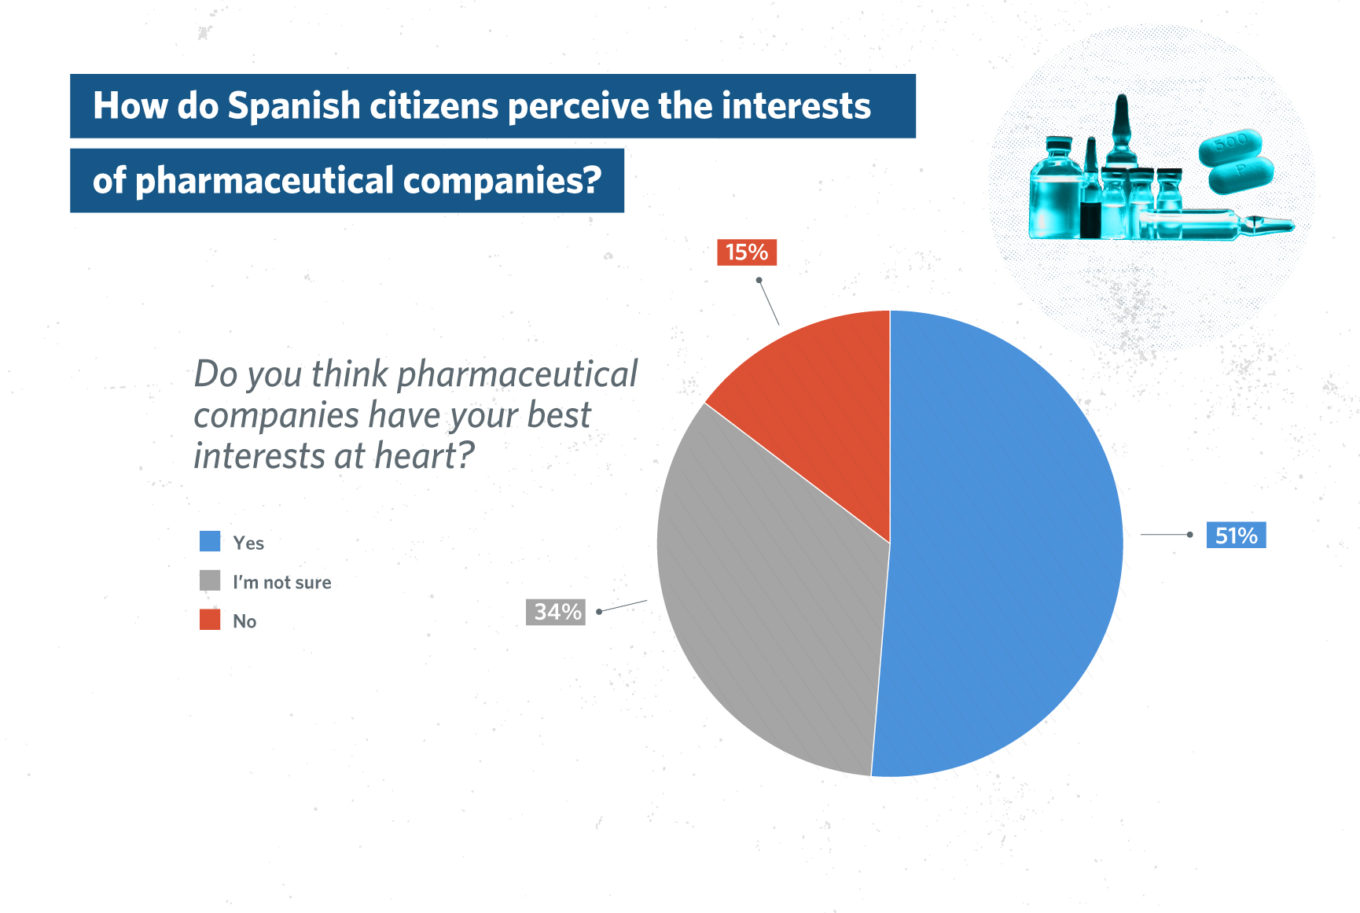 How do Spanish citizens perceive the interests of pharmaceutical companies